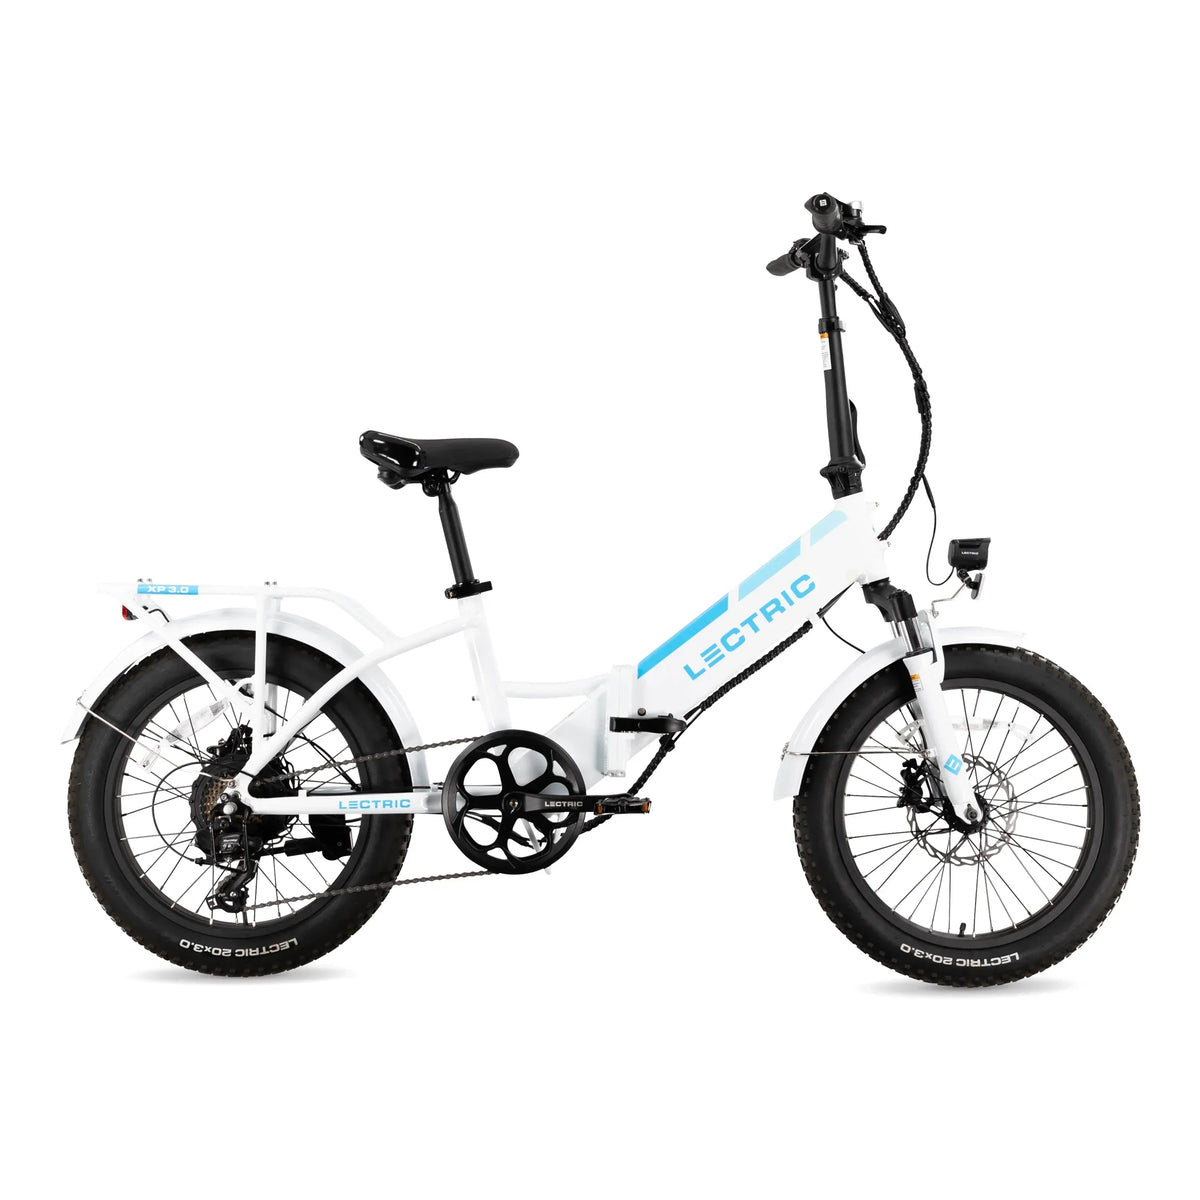 Lectric XP 3.0 eBike Adult Folding Electric Bicycle Black White